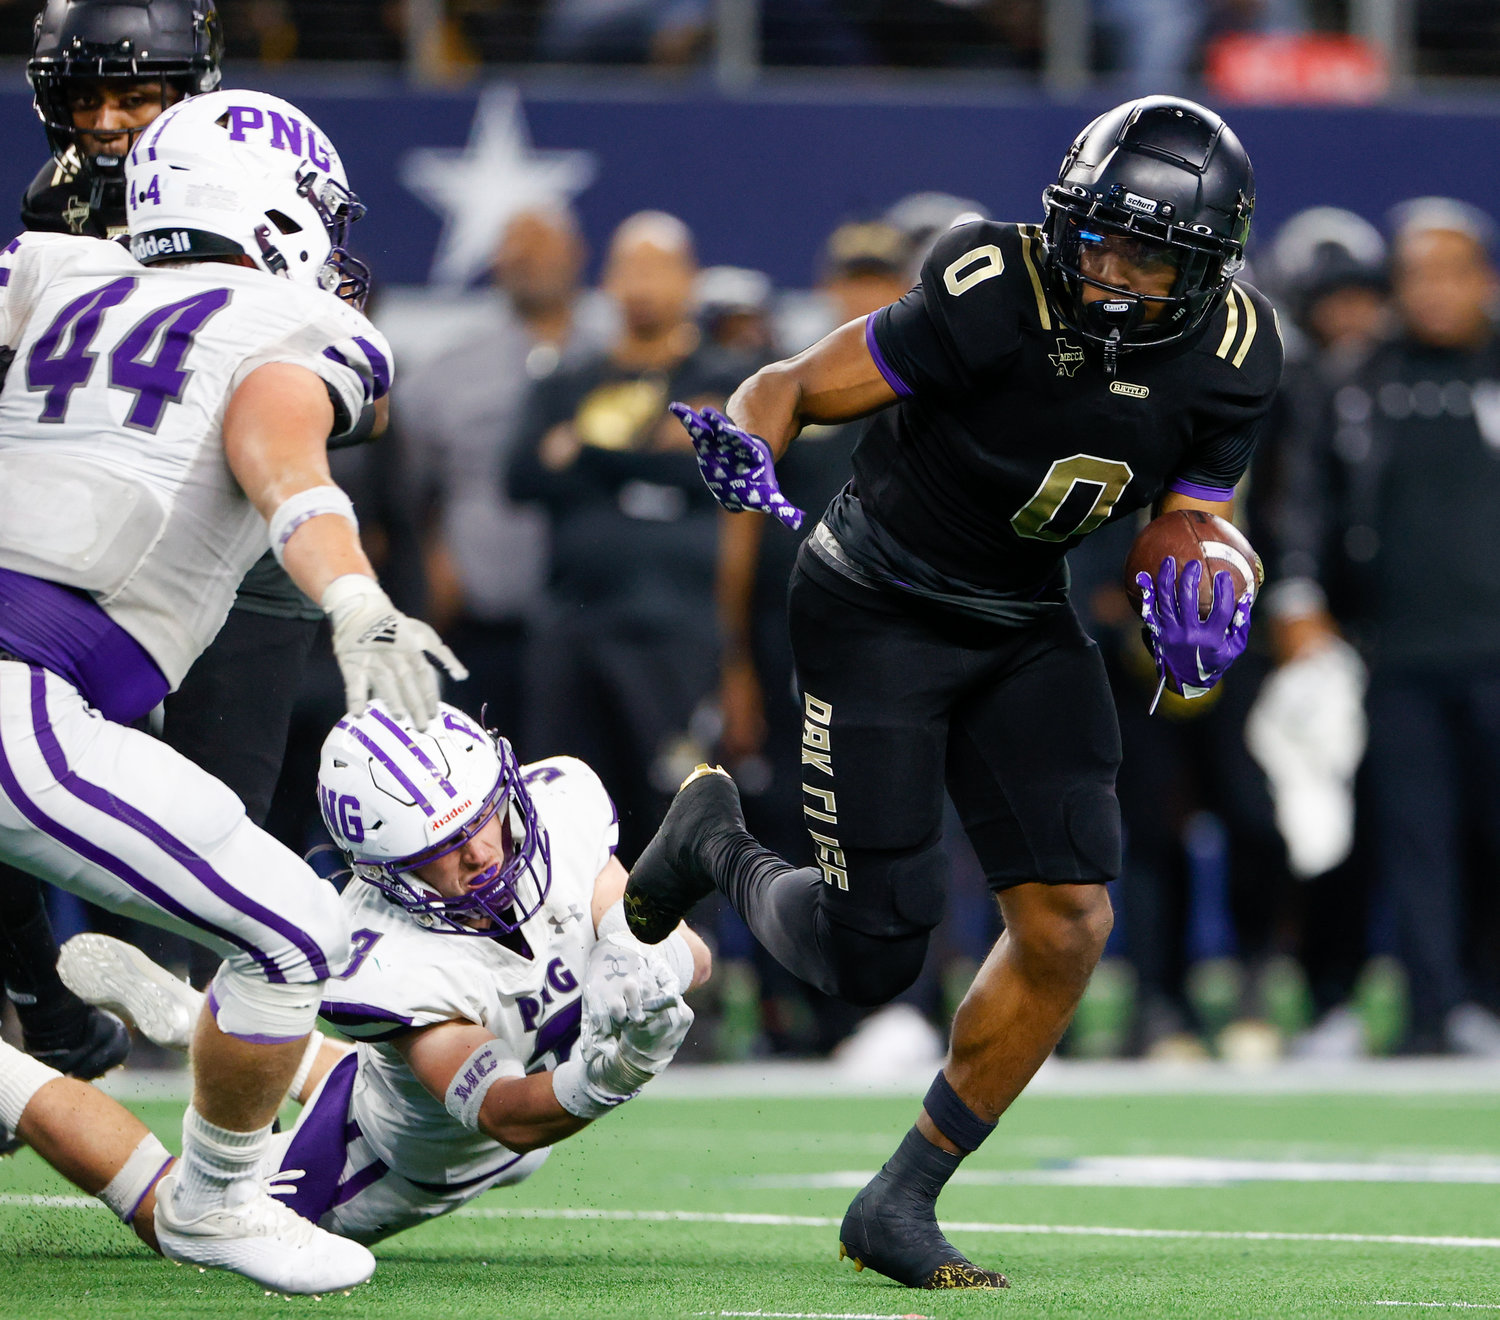 South Oak Cliff running back Jayvon Thomas (0) slips through the tackle of Port Neches-Groves linebacker Mason Droddy (3) during the Class 5A Division II football state championship game between South Oak Cliff and Port Neches-Groves in Arlington, Texas, on Dec. 16, 2022.